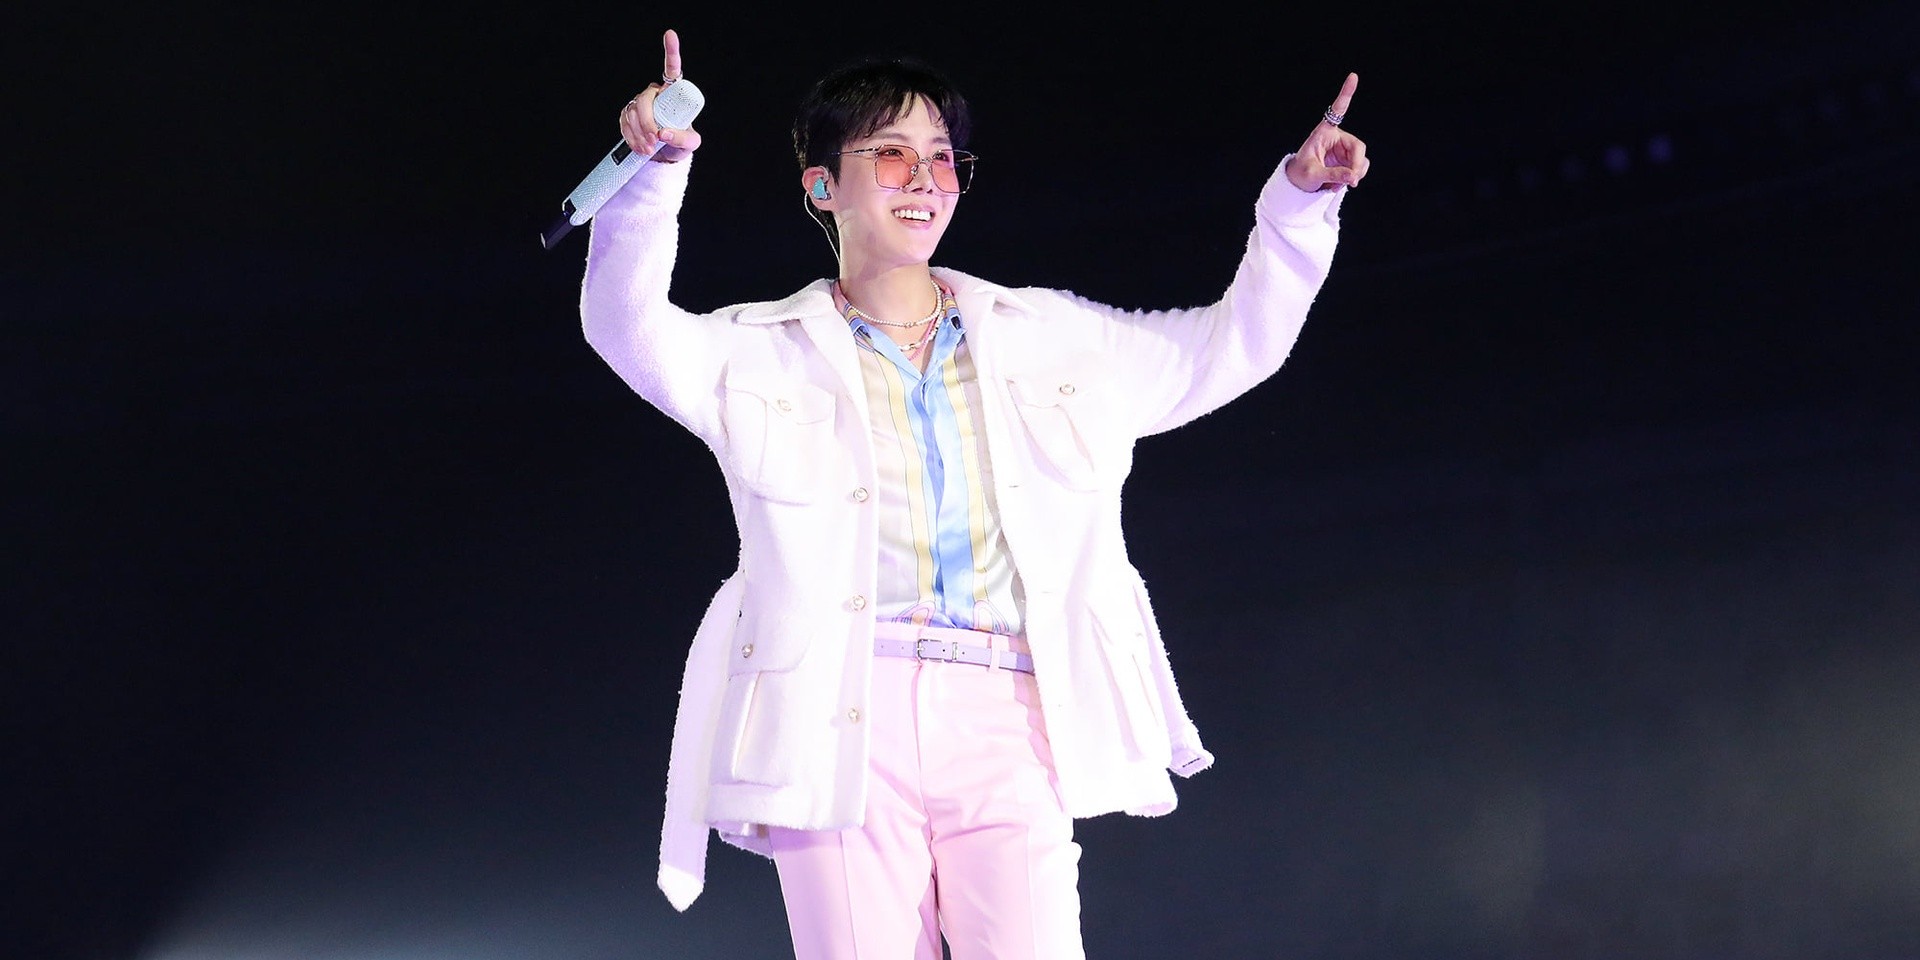 "I'm very much okay!": BTS' J-hope assures fans as he ends quarantine for COVID-19, confirmed to go to GRAMMYs